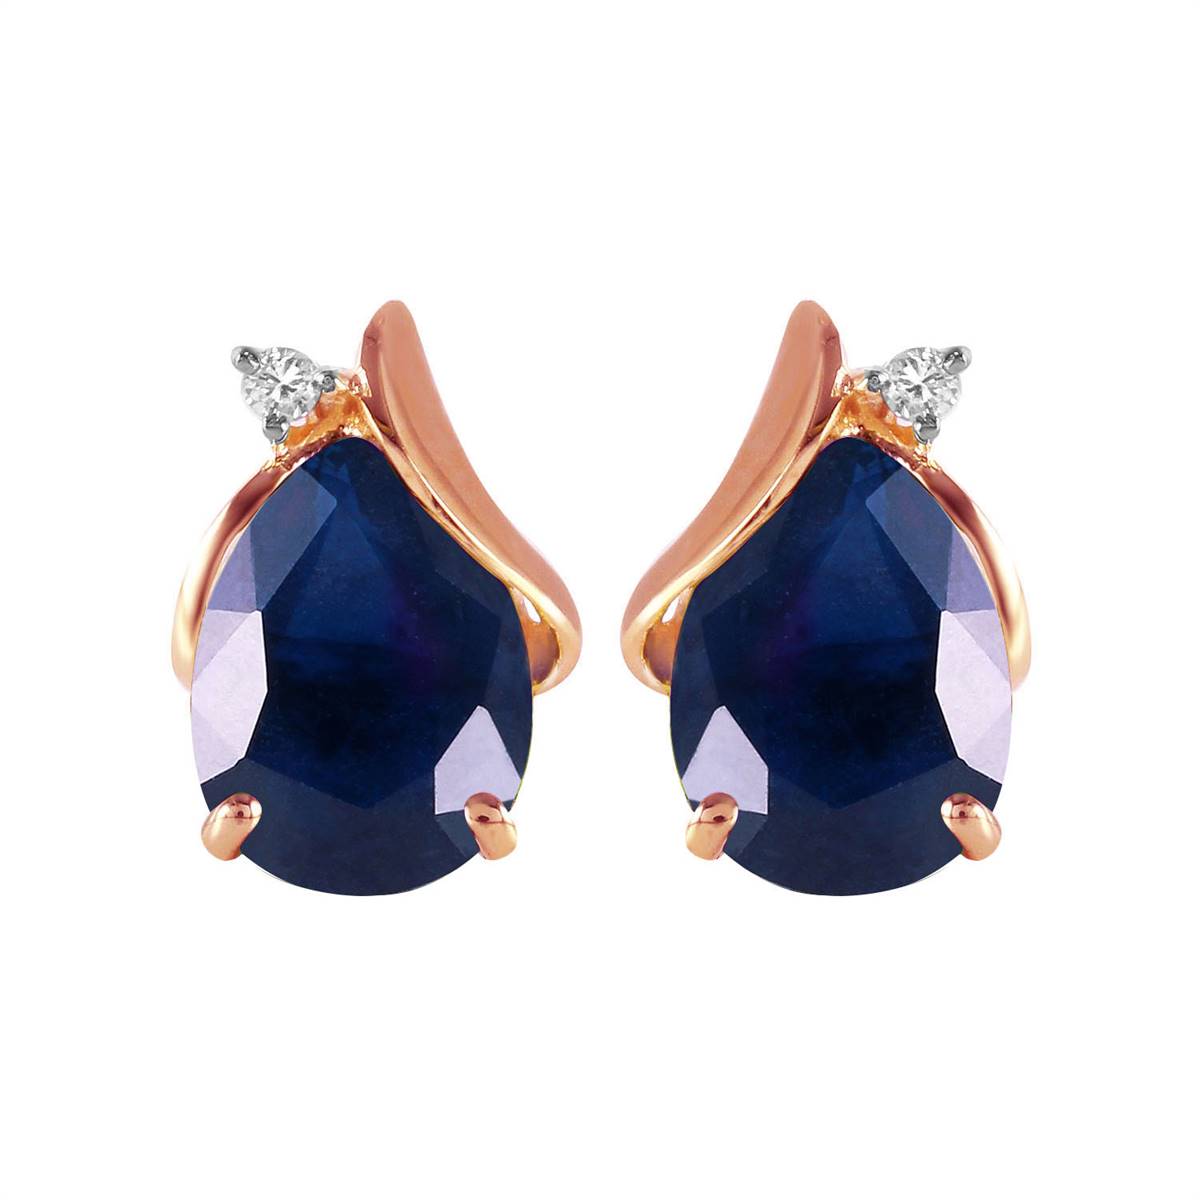 14K Solid Rose Gold Studs Earrings Natural Diamond & Sapphire Jewelry